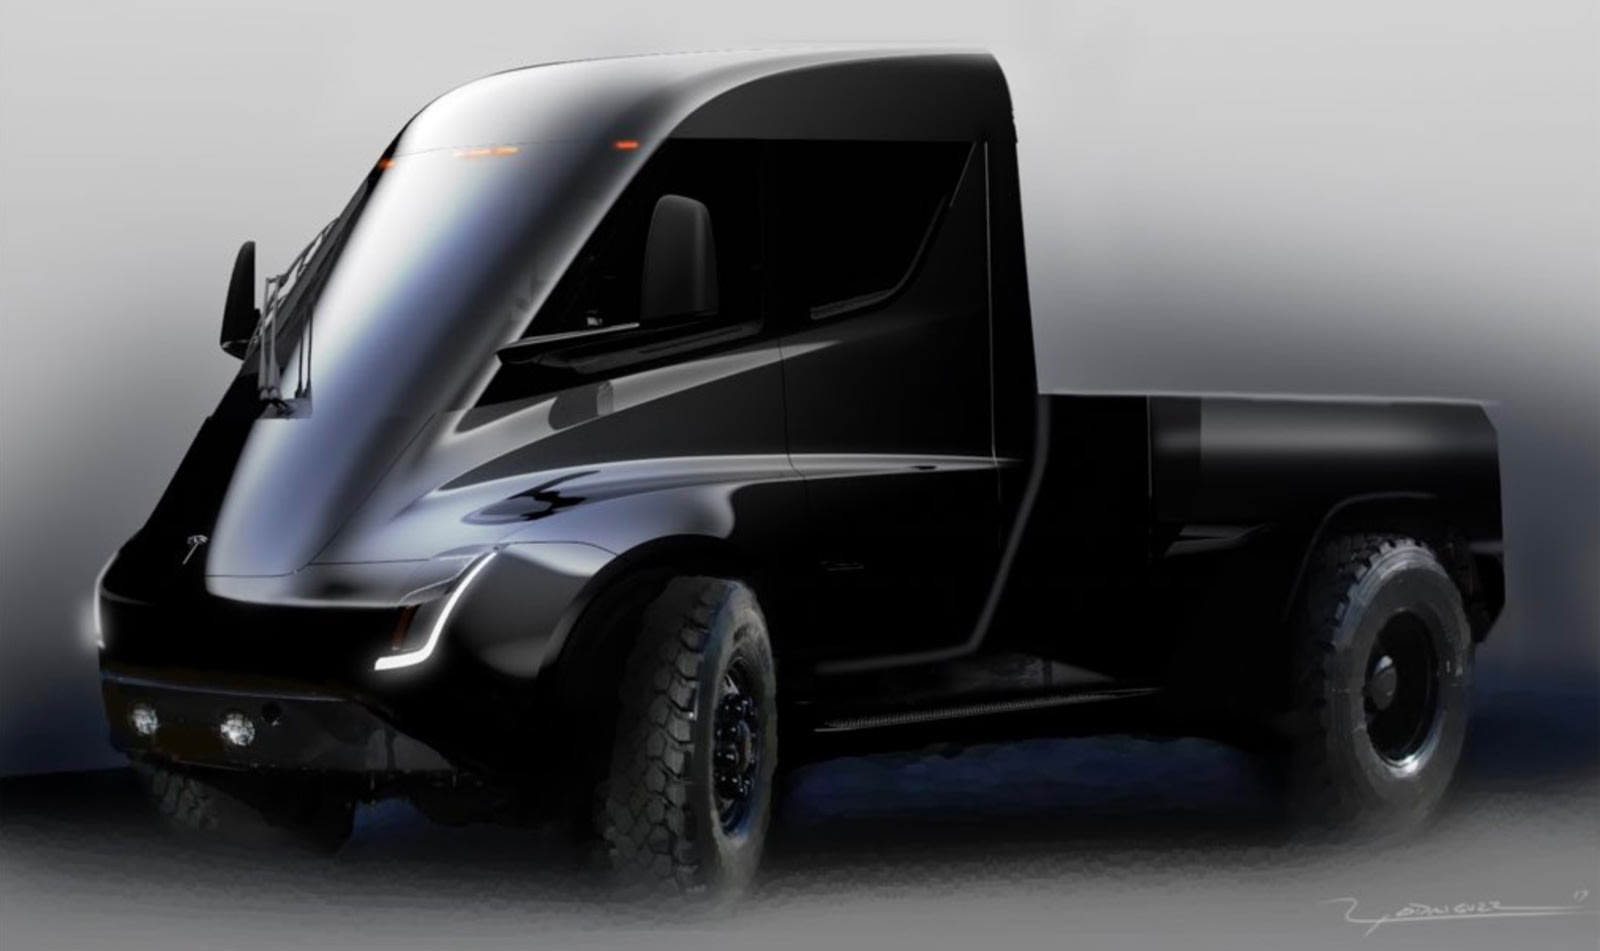 Elon Musk vows to build Tesla pickup truck 'right after' Model Y